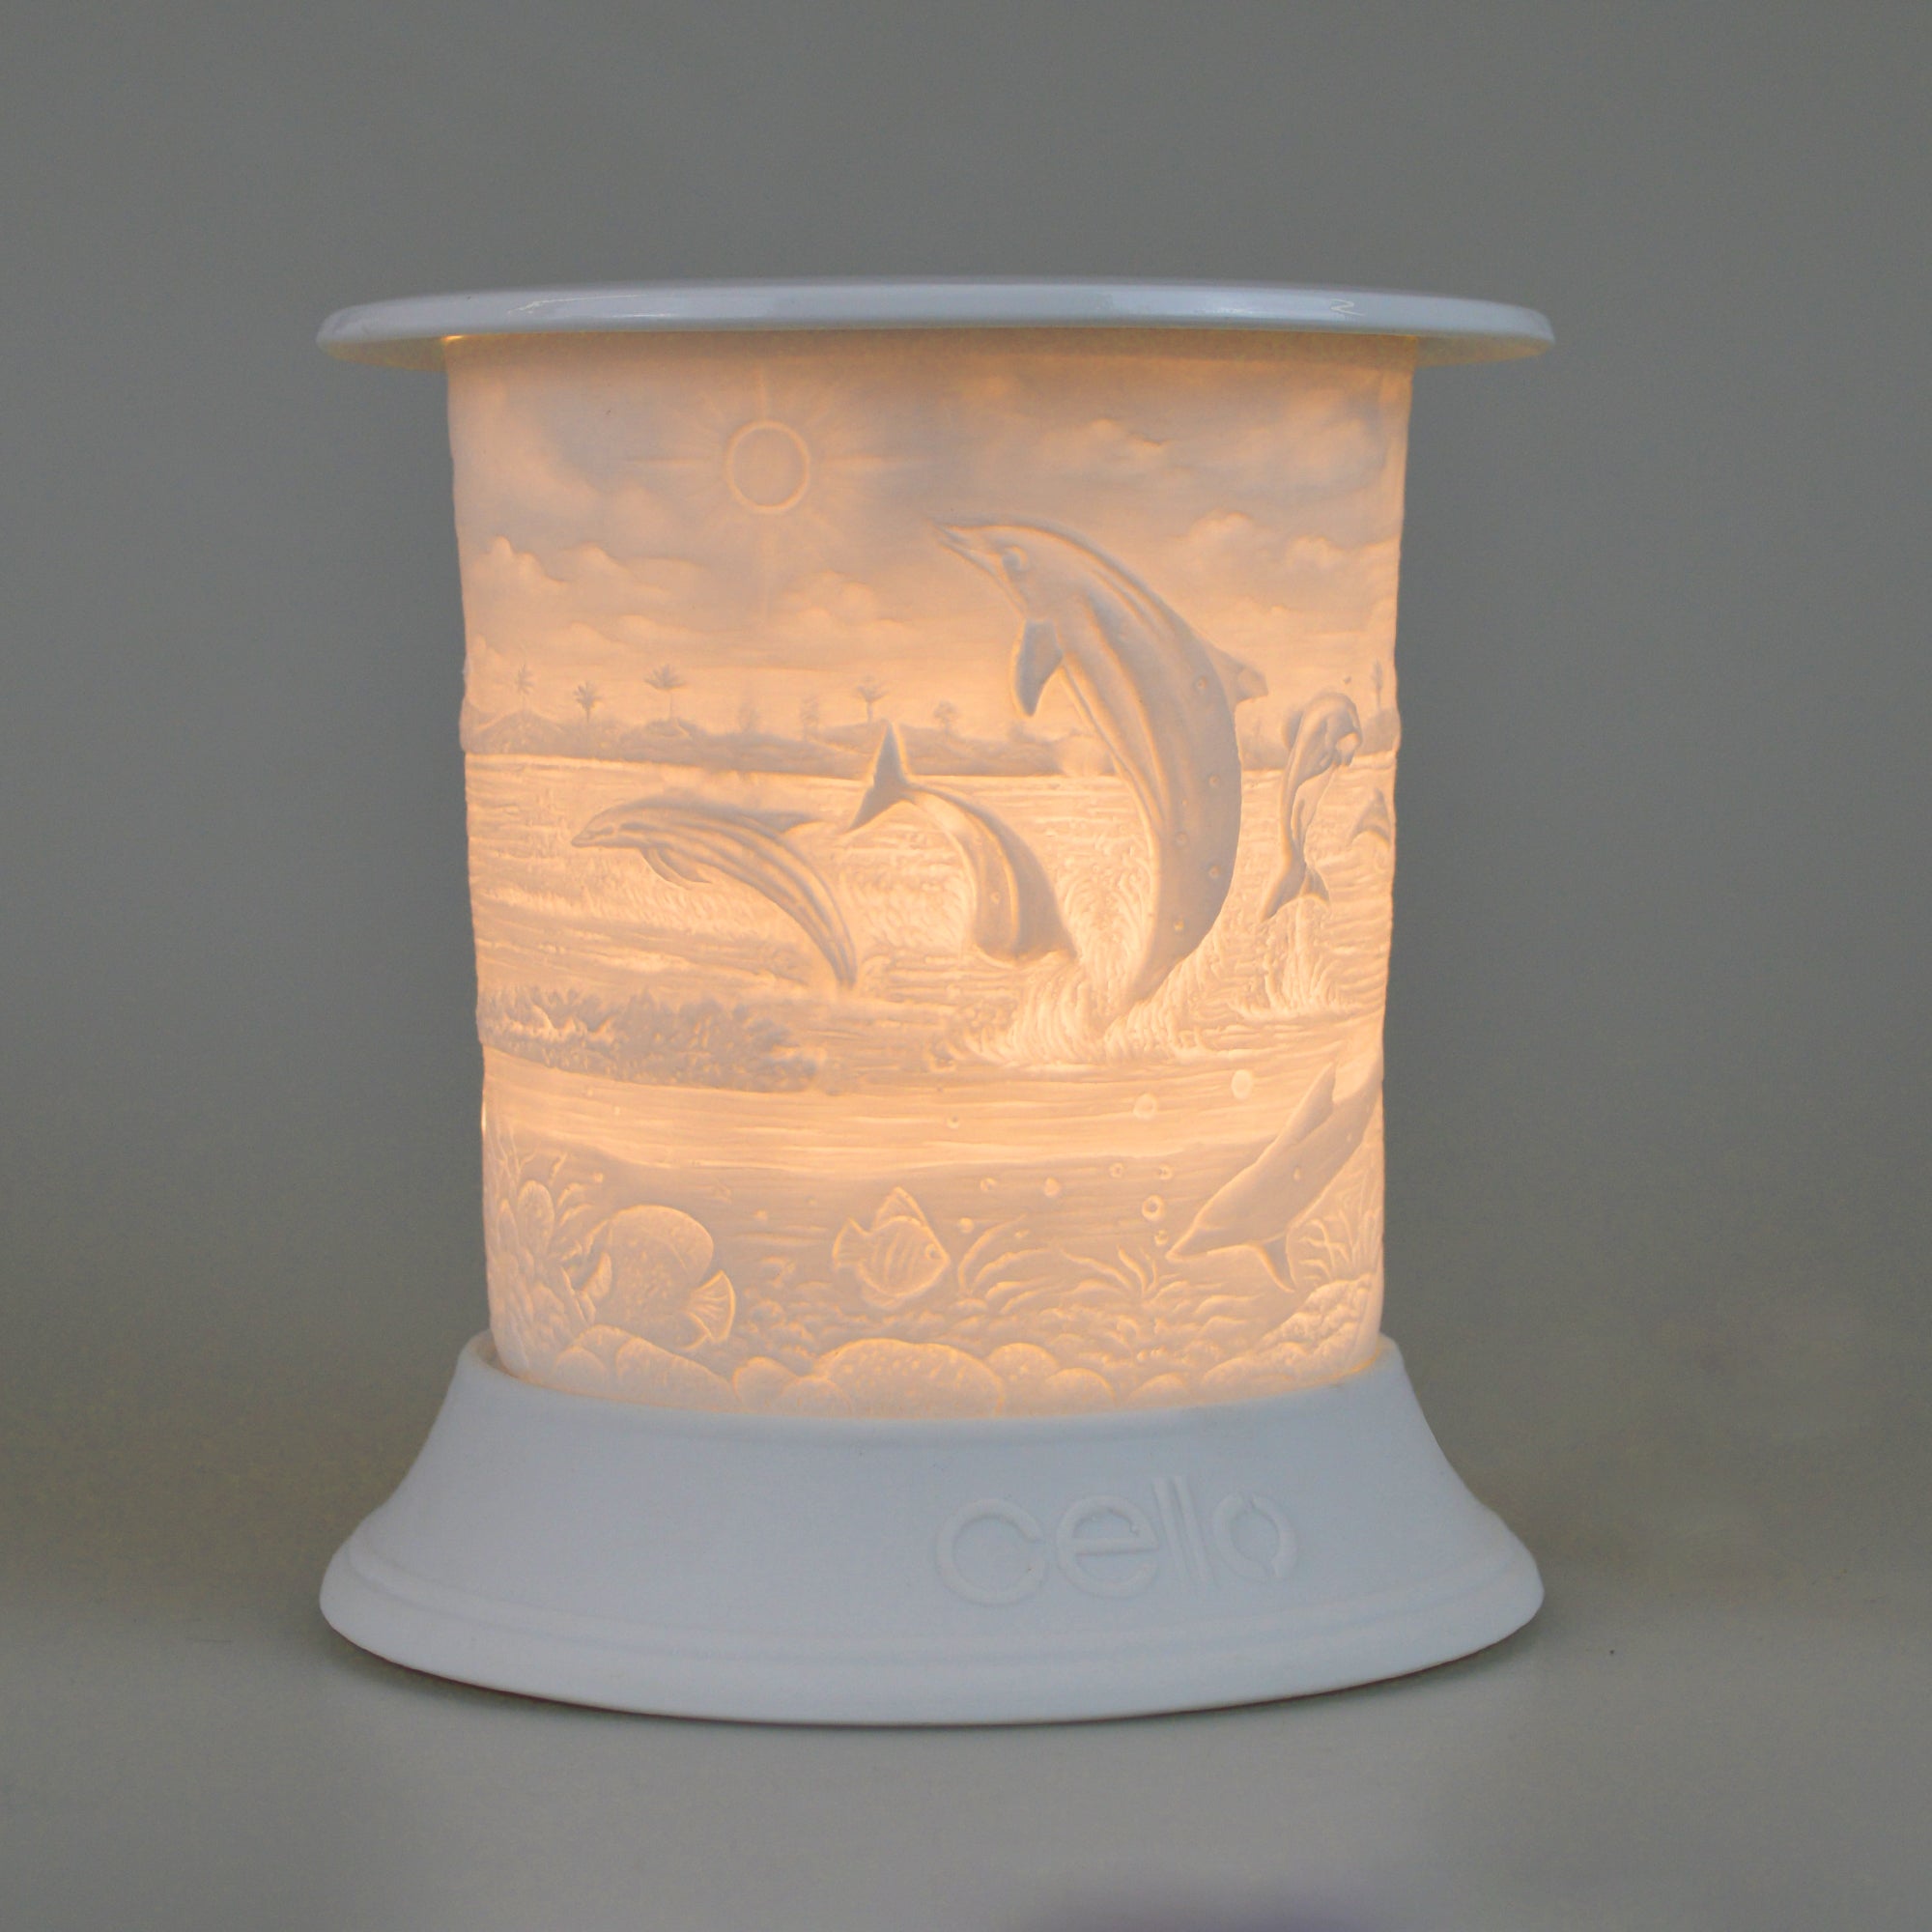 Cello - Straight Porcelain Electric Wax Burner - Dolphin